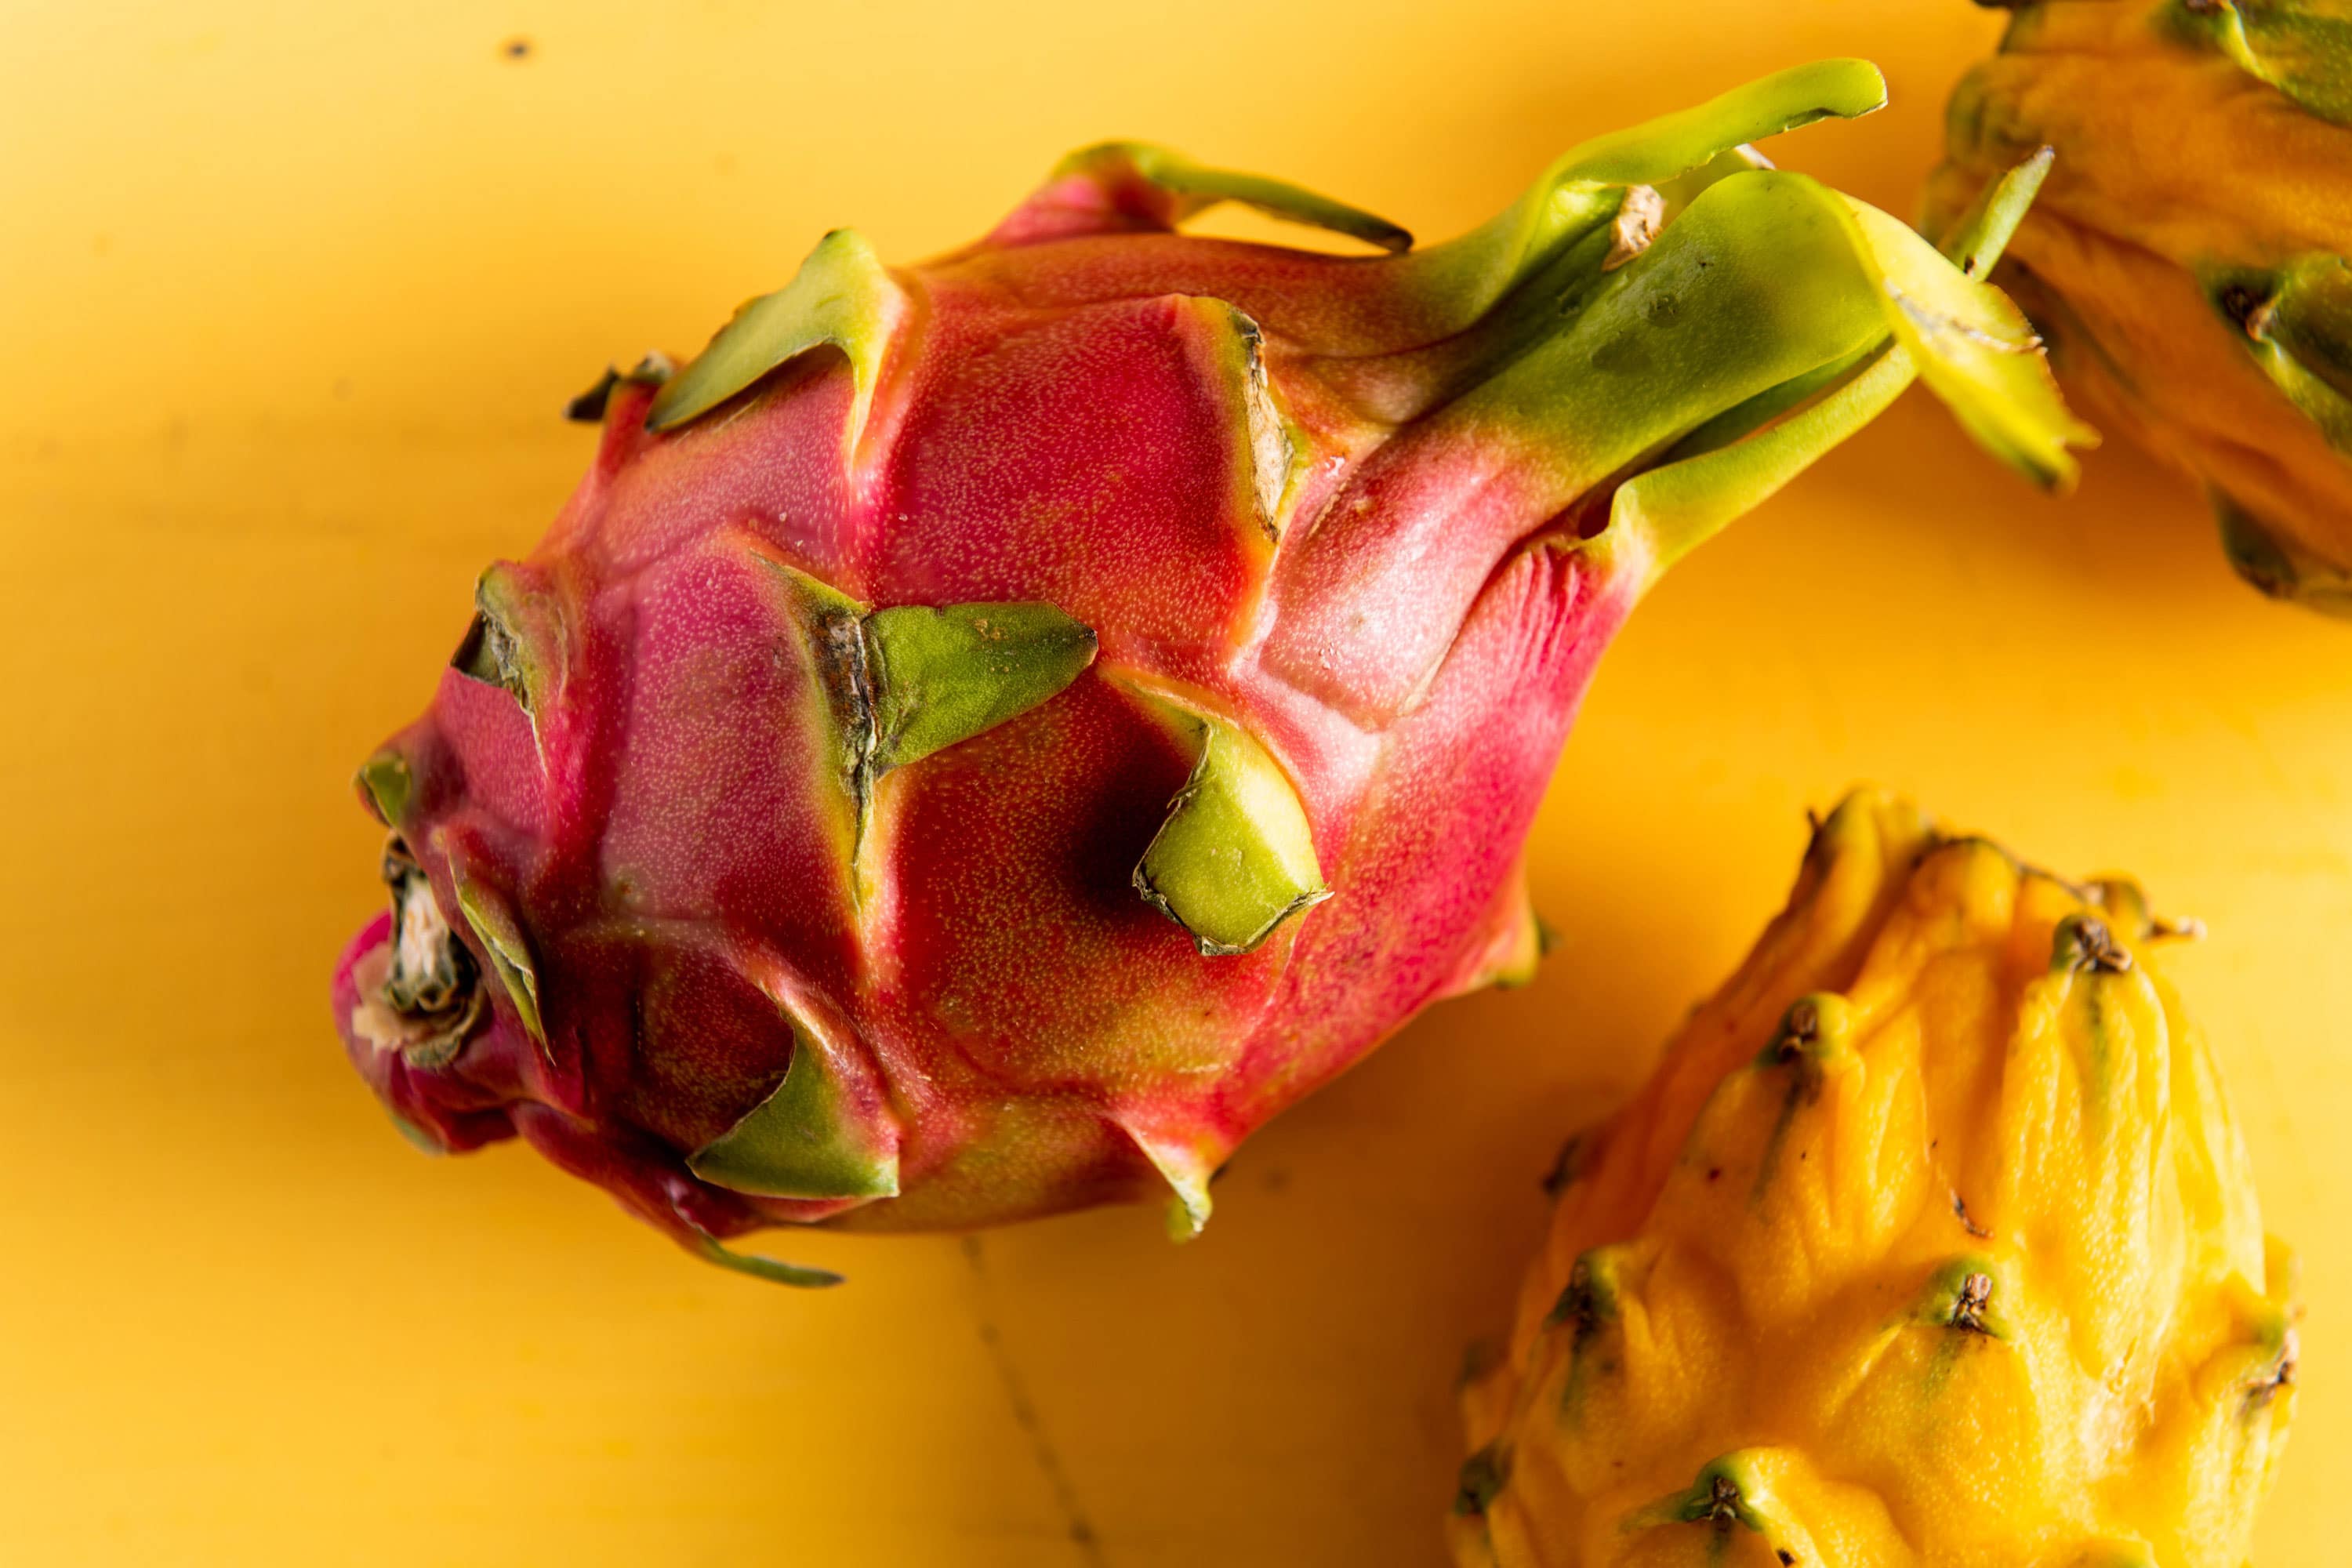 Pink uncut dragonfruit on yellow surface with yellow dragon fruit nearby.